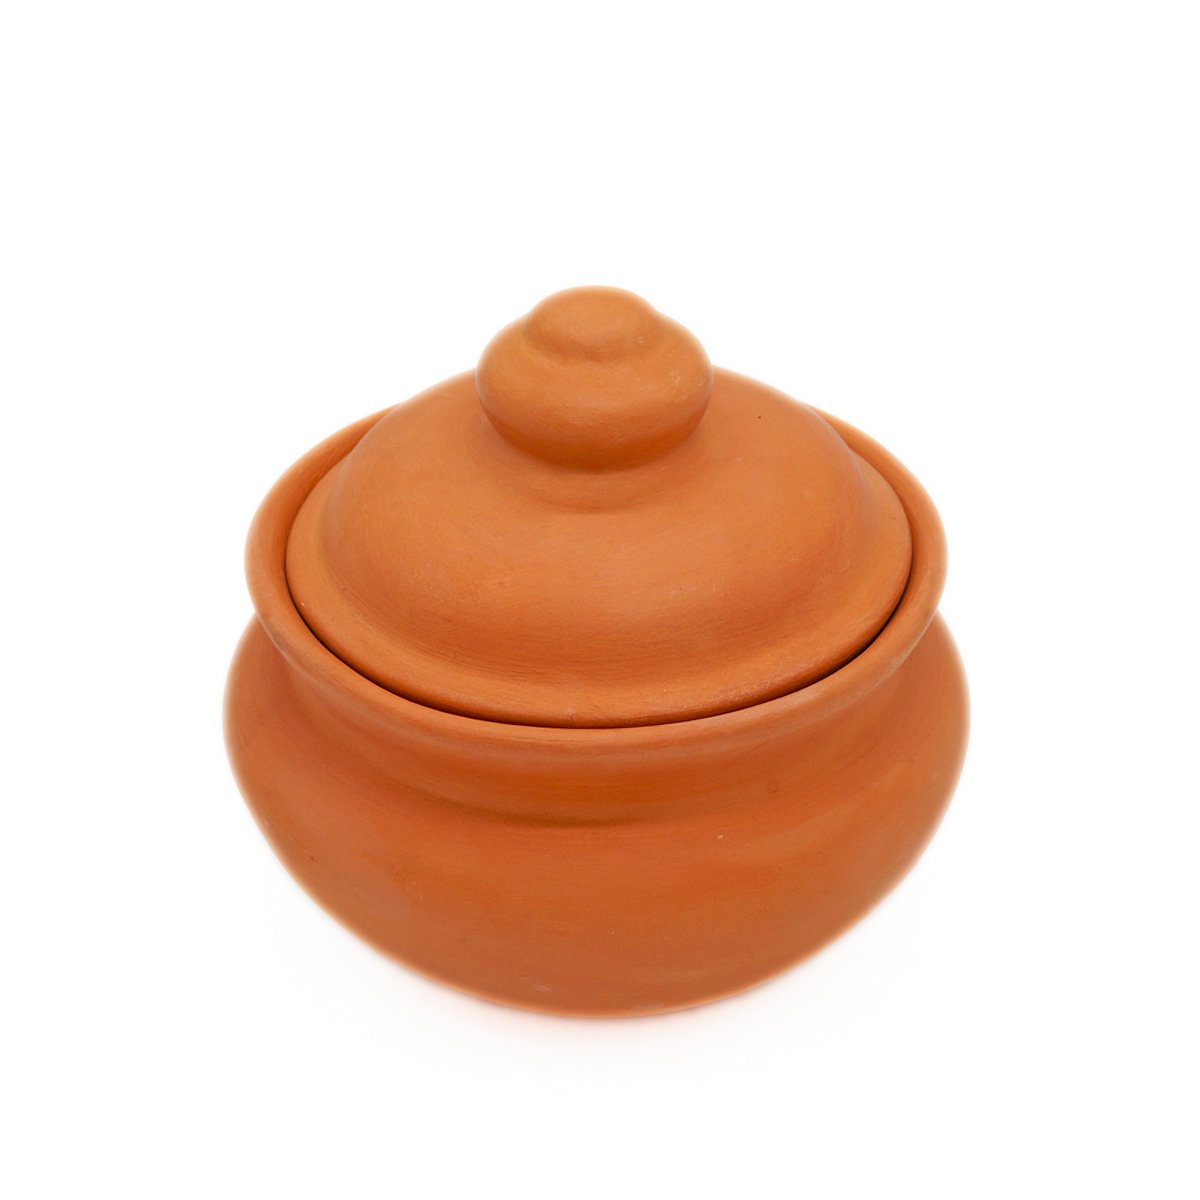 Small clay pot with a lid